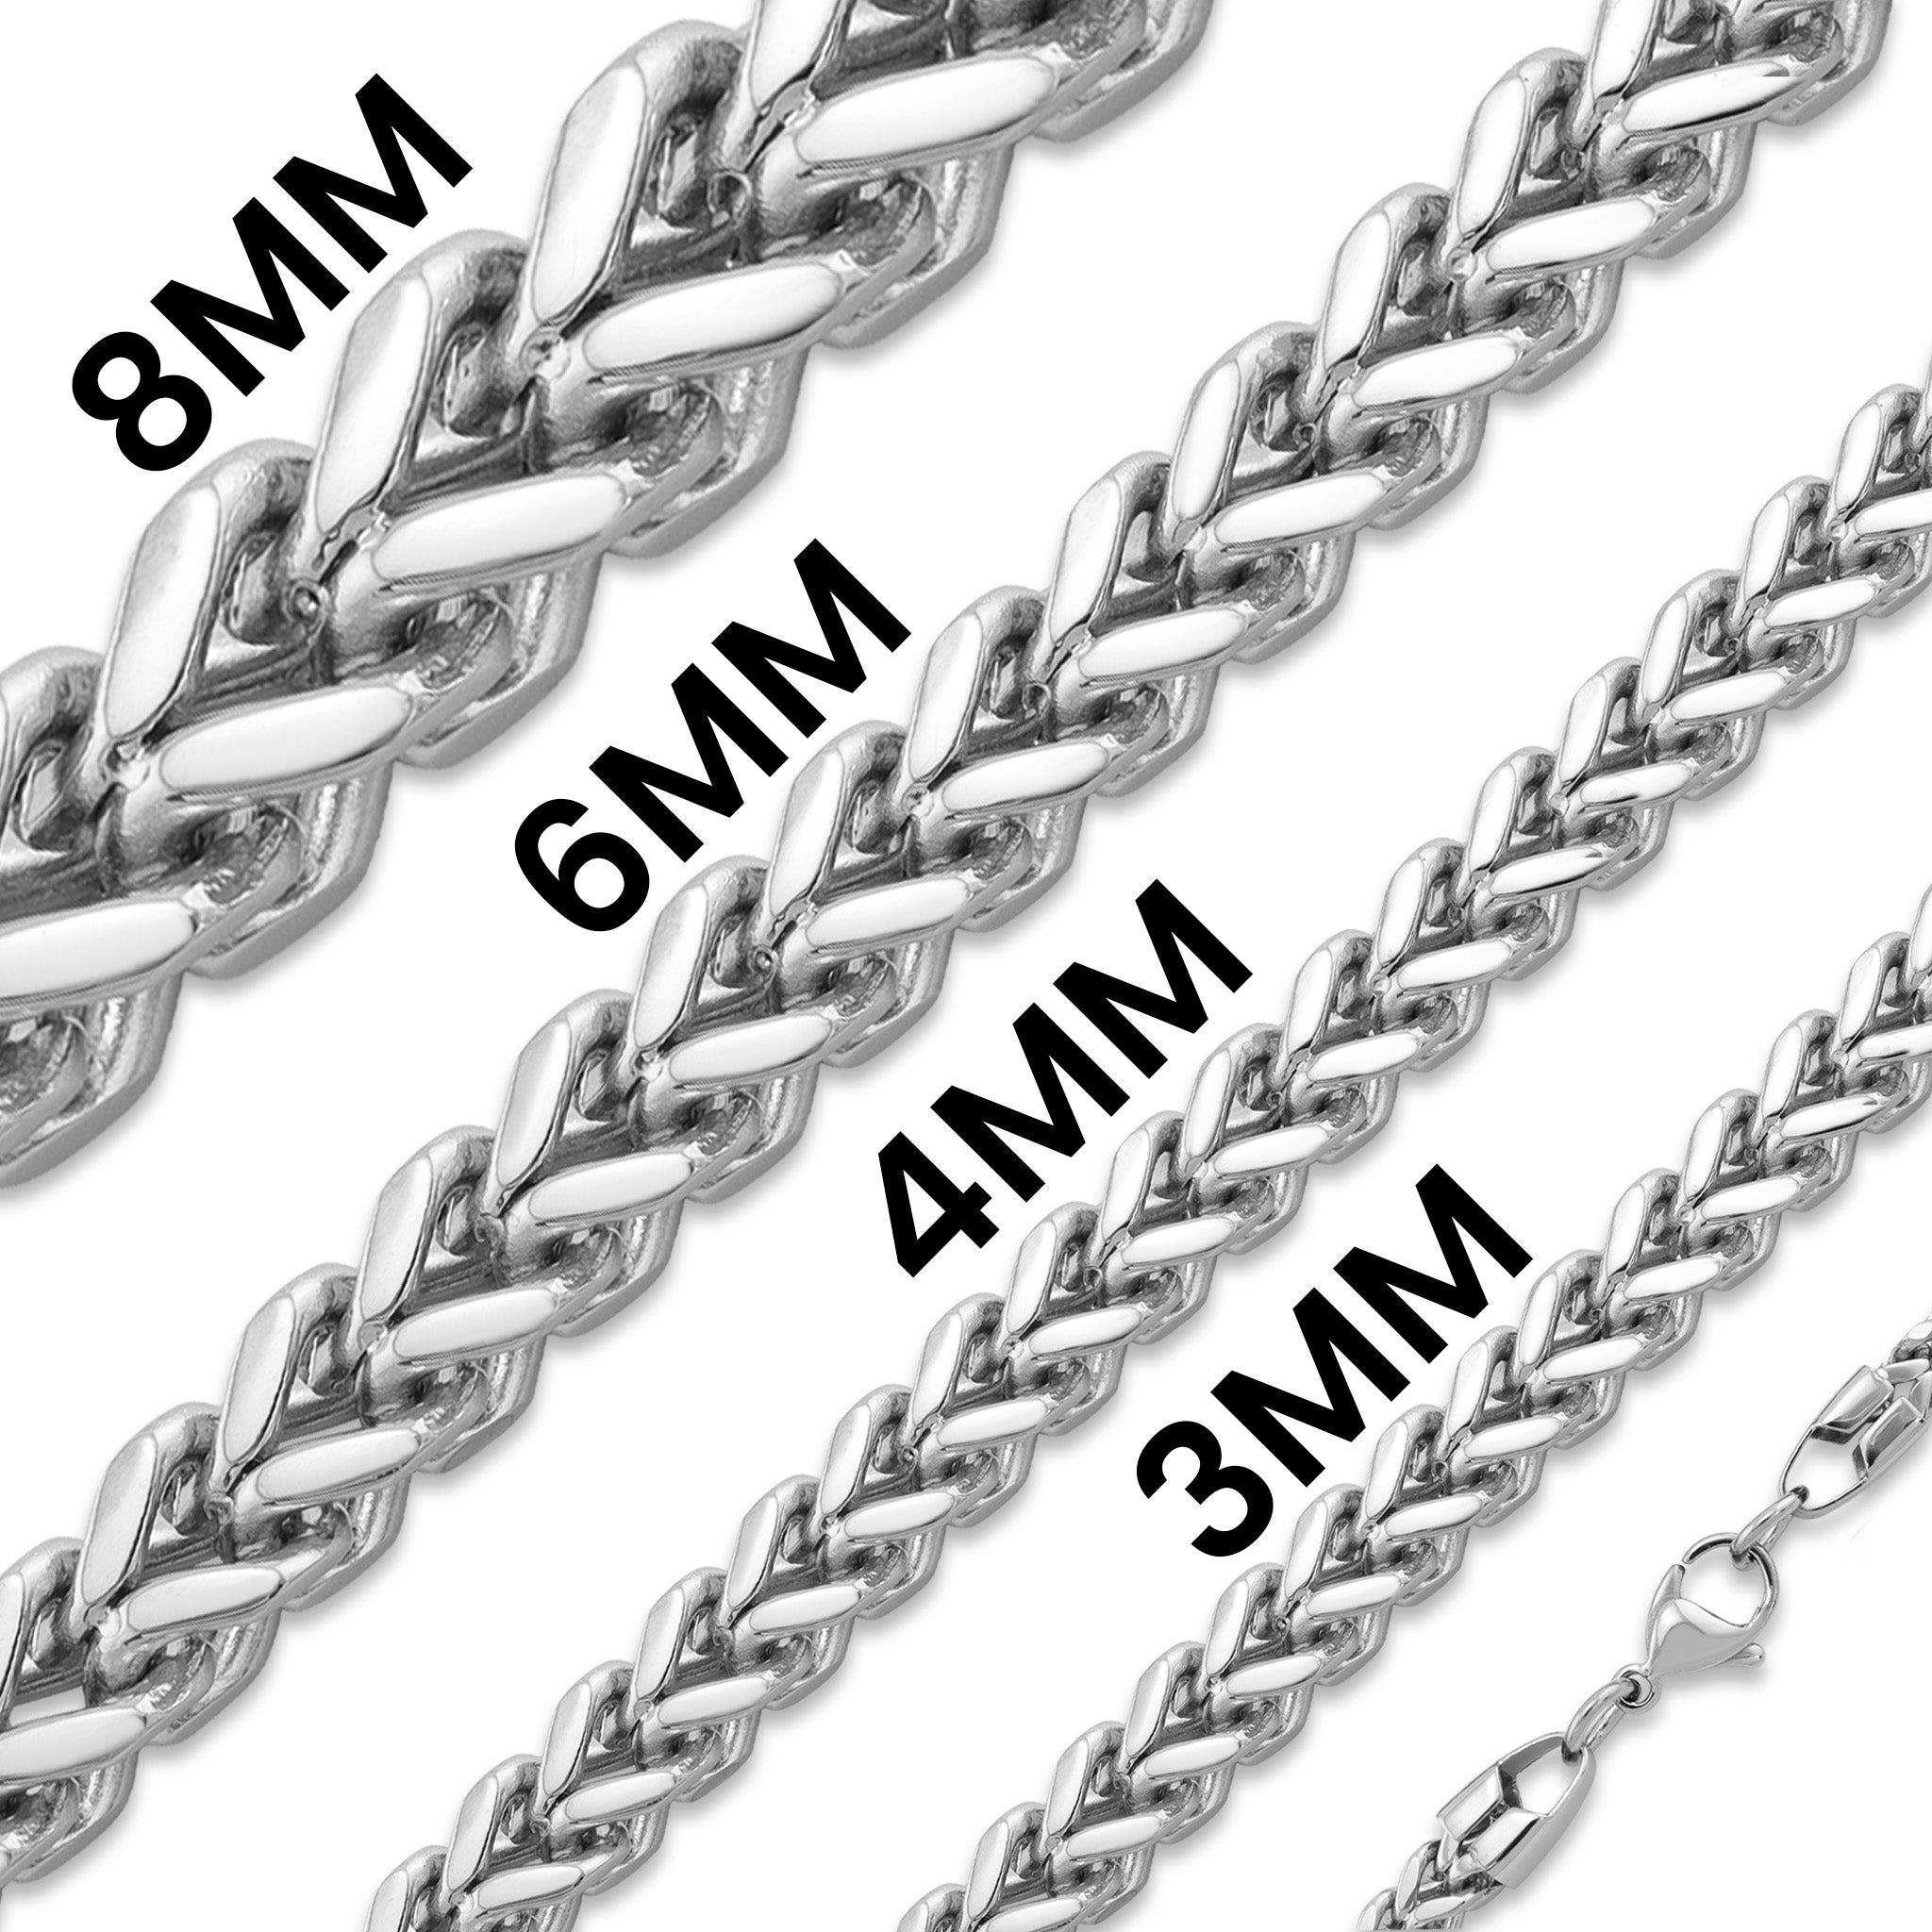 Coastal Jewelry Men's 24 Inch Stainless Steel Beveled Curb Chain Necklace  (10 mm)